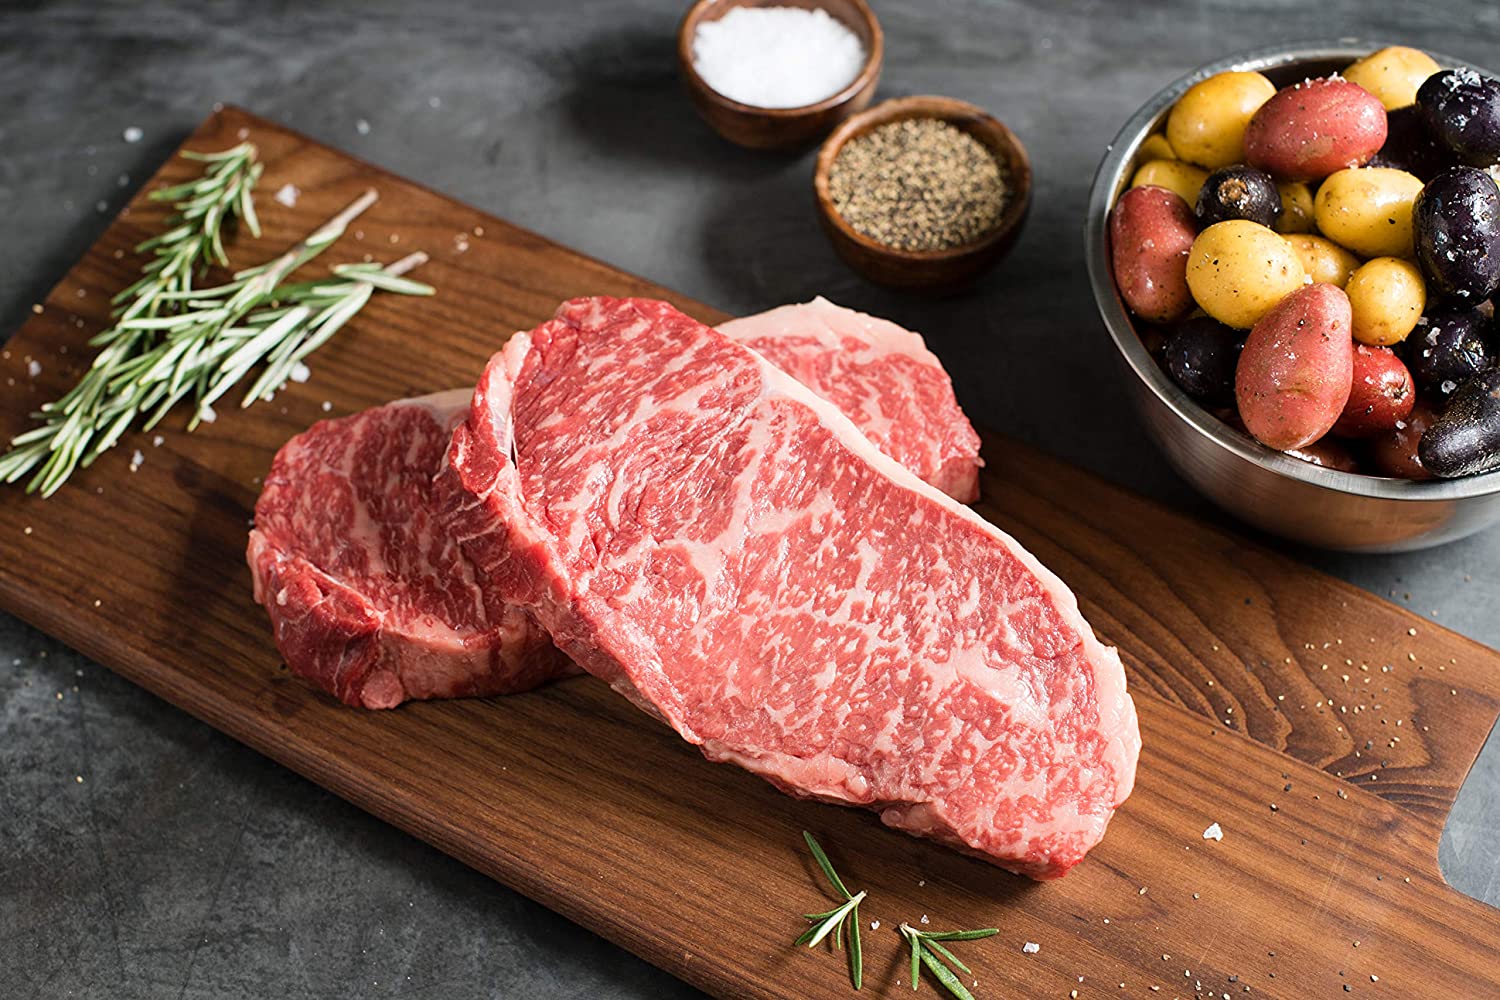 🍴 If You’ve Tried 18/27 of These Foods, You’re a Sophisticated Eater Wagyu Beef